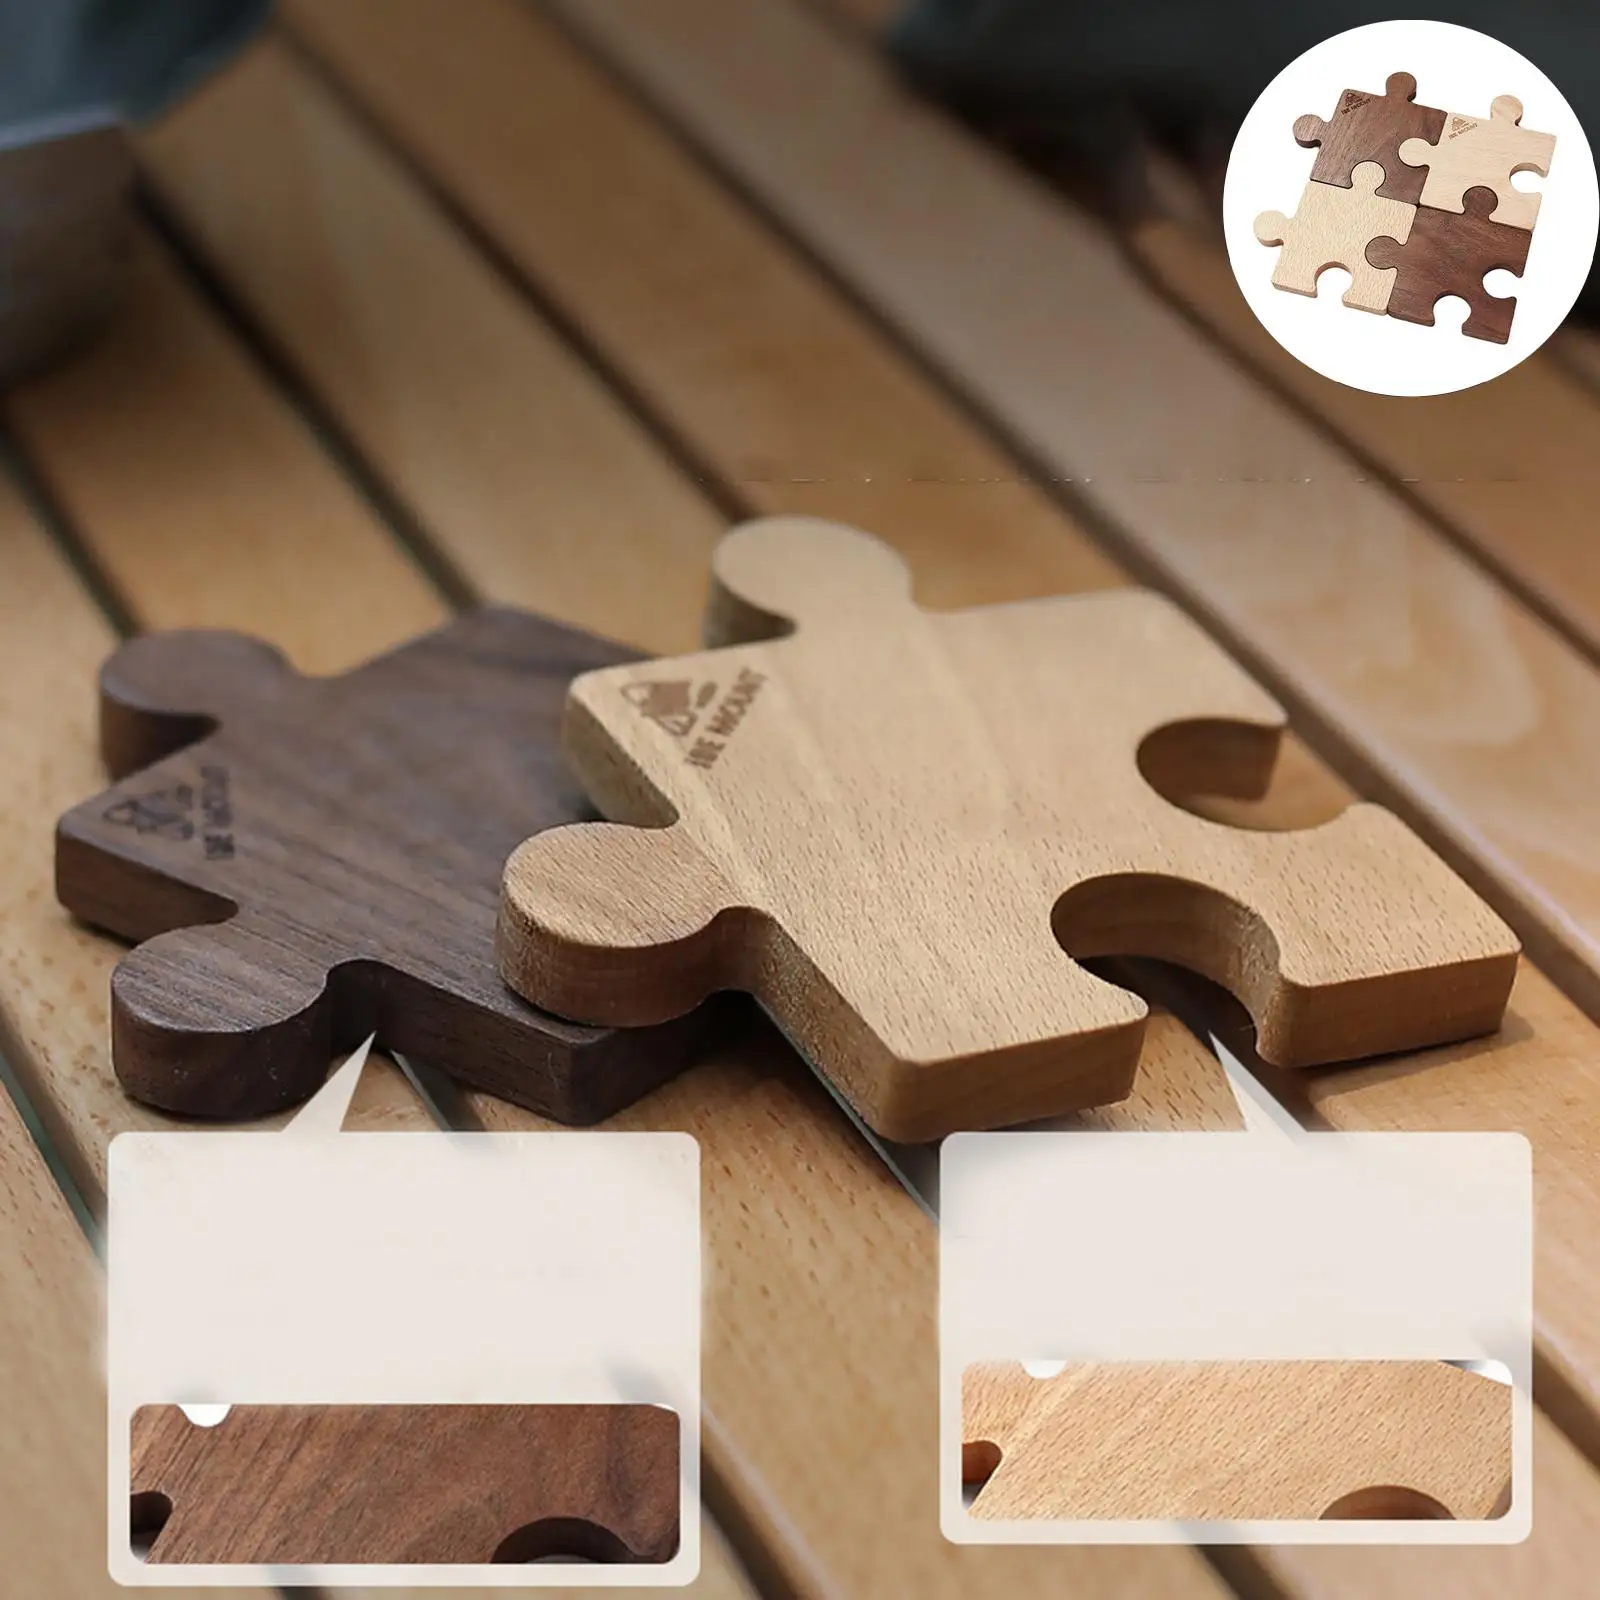 Set of 4 Wooden Coasters Jigsaw Puzzle Design Heat Resistant Durable Housewarming Gifts Tea Cup Pad for Any Kind of Cup Tabletop